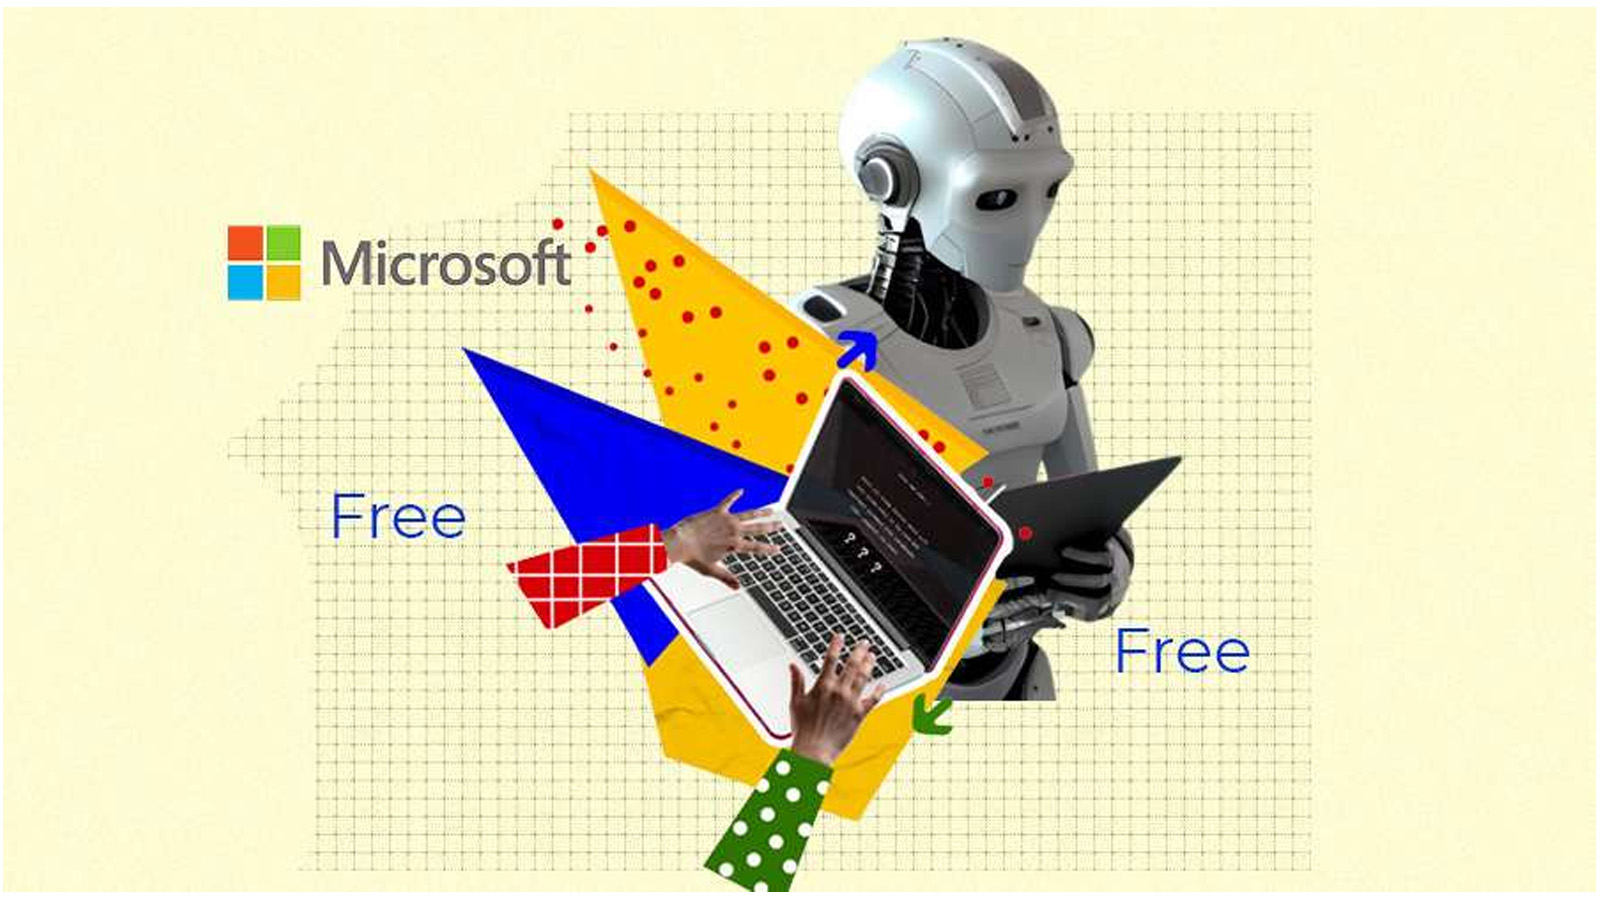 Microsoft Free AI Training Course With Professional Certificate